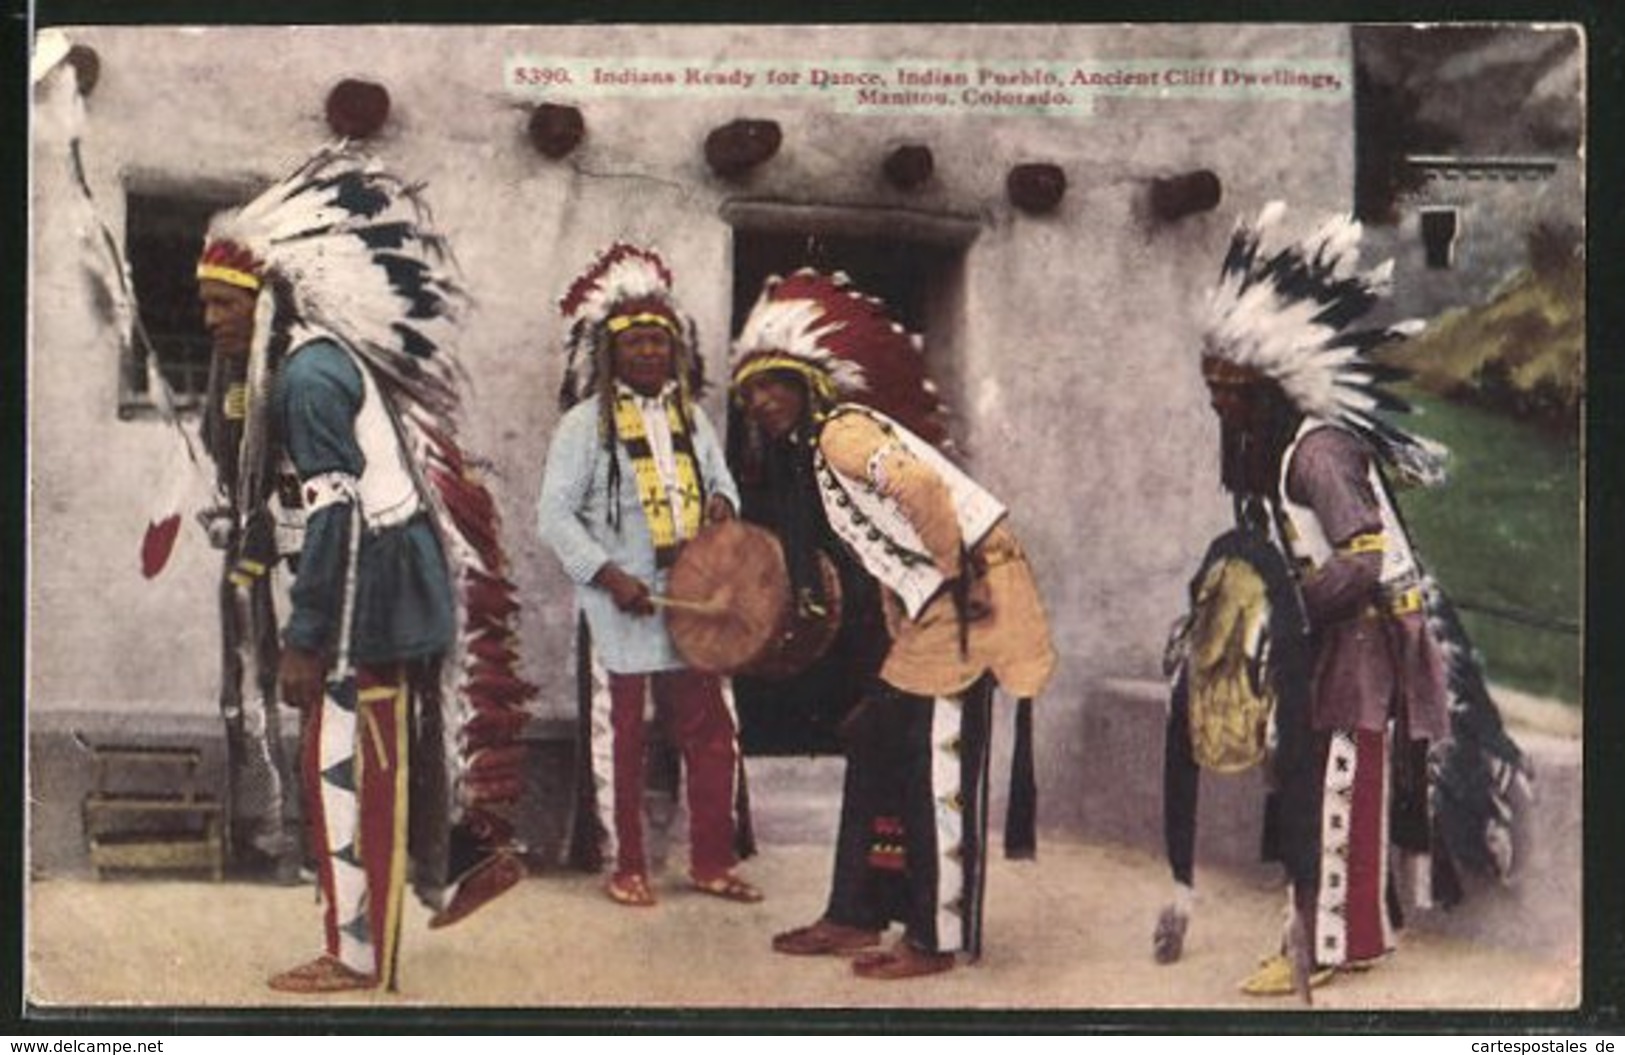 AK Indians Ready For Dance, Indian Pueblo, Ancient Cliss Dwellings, Manitou, Colorado - Indianer